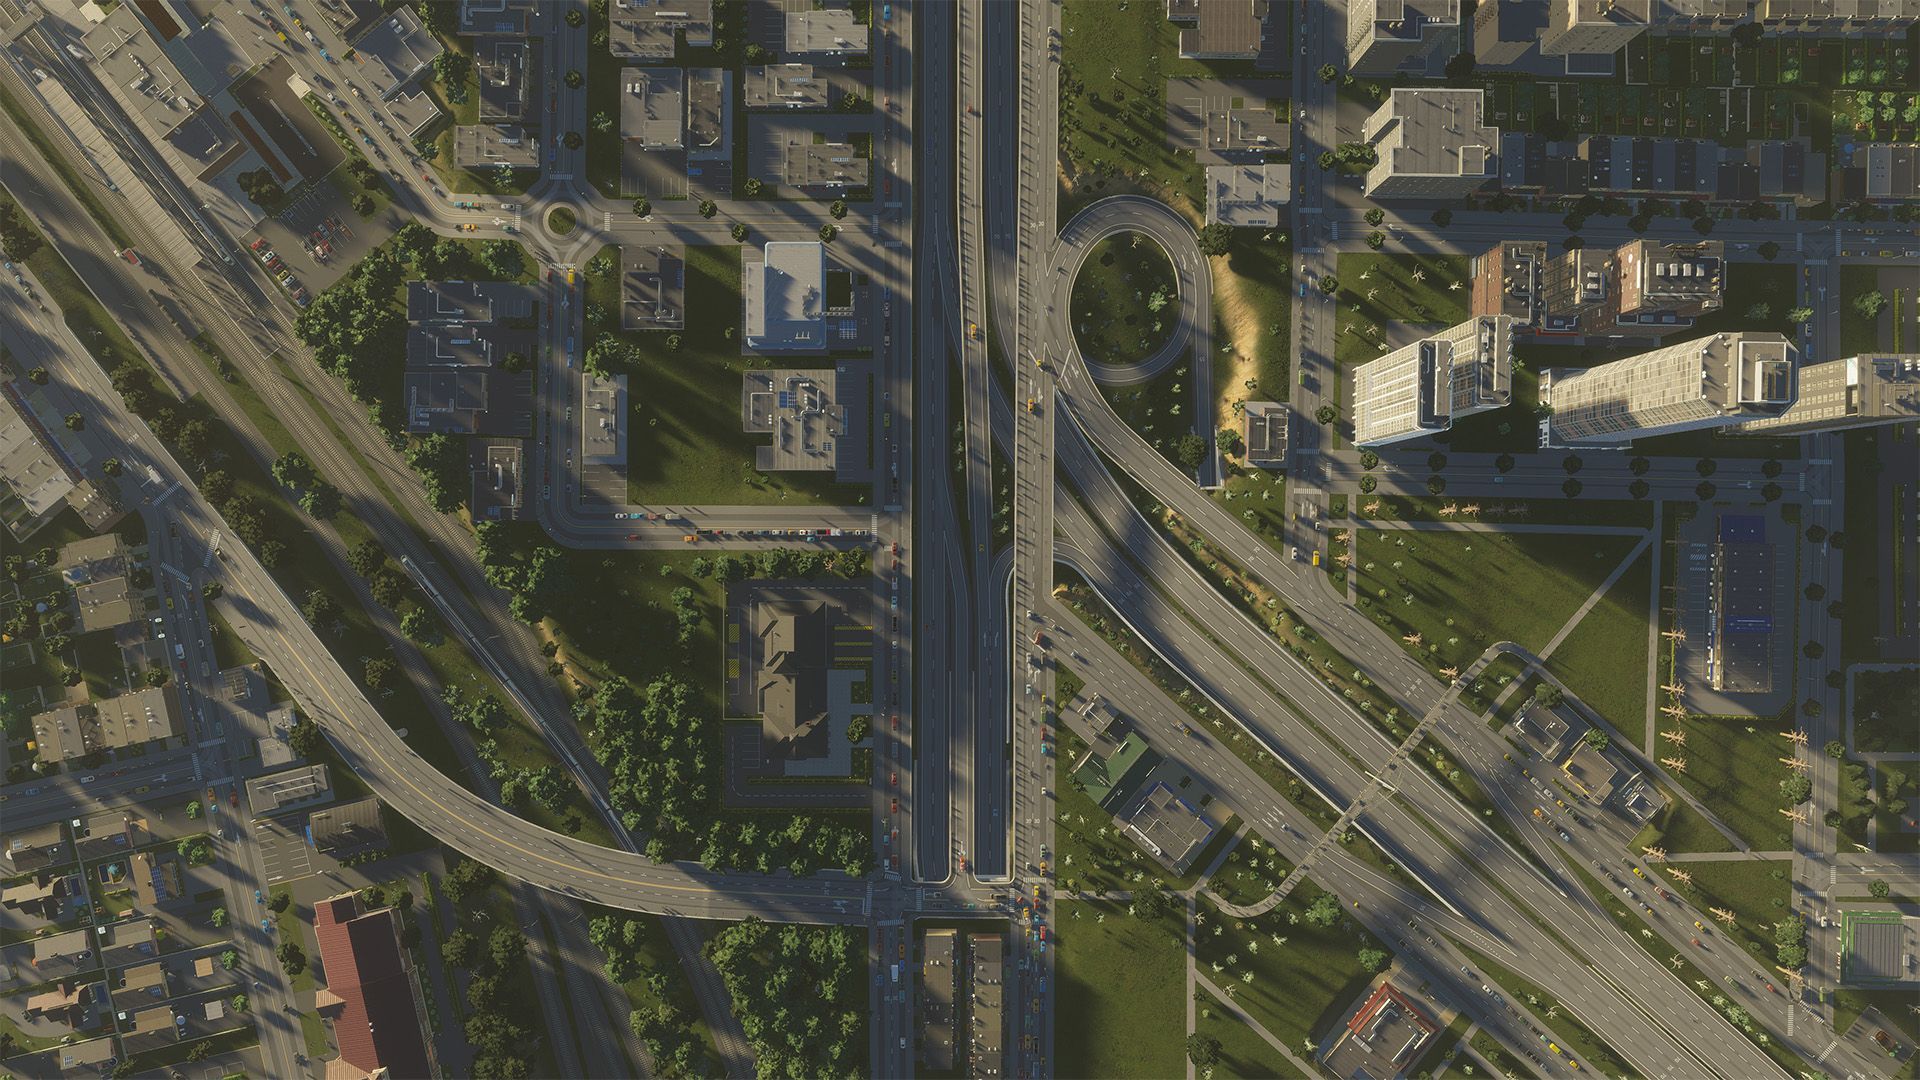 How to fix Cities Skylines 2 flickering issue